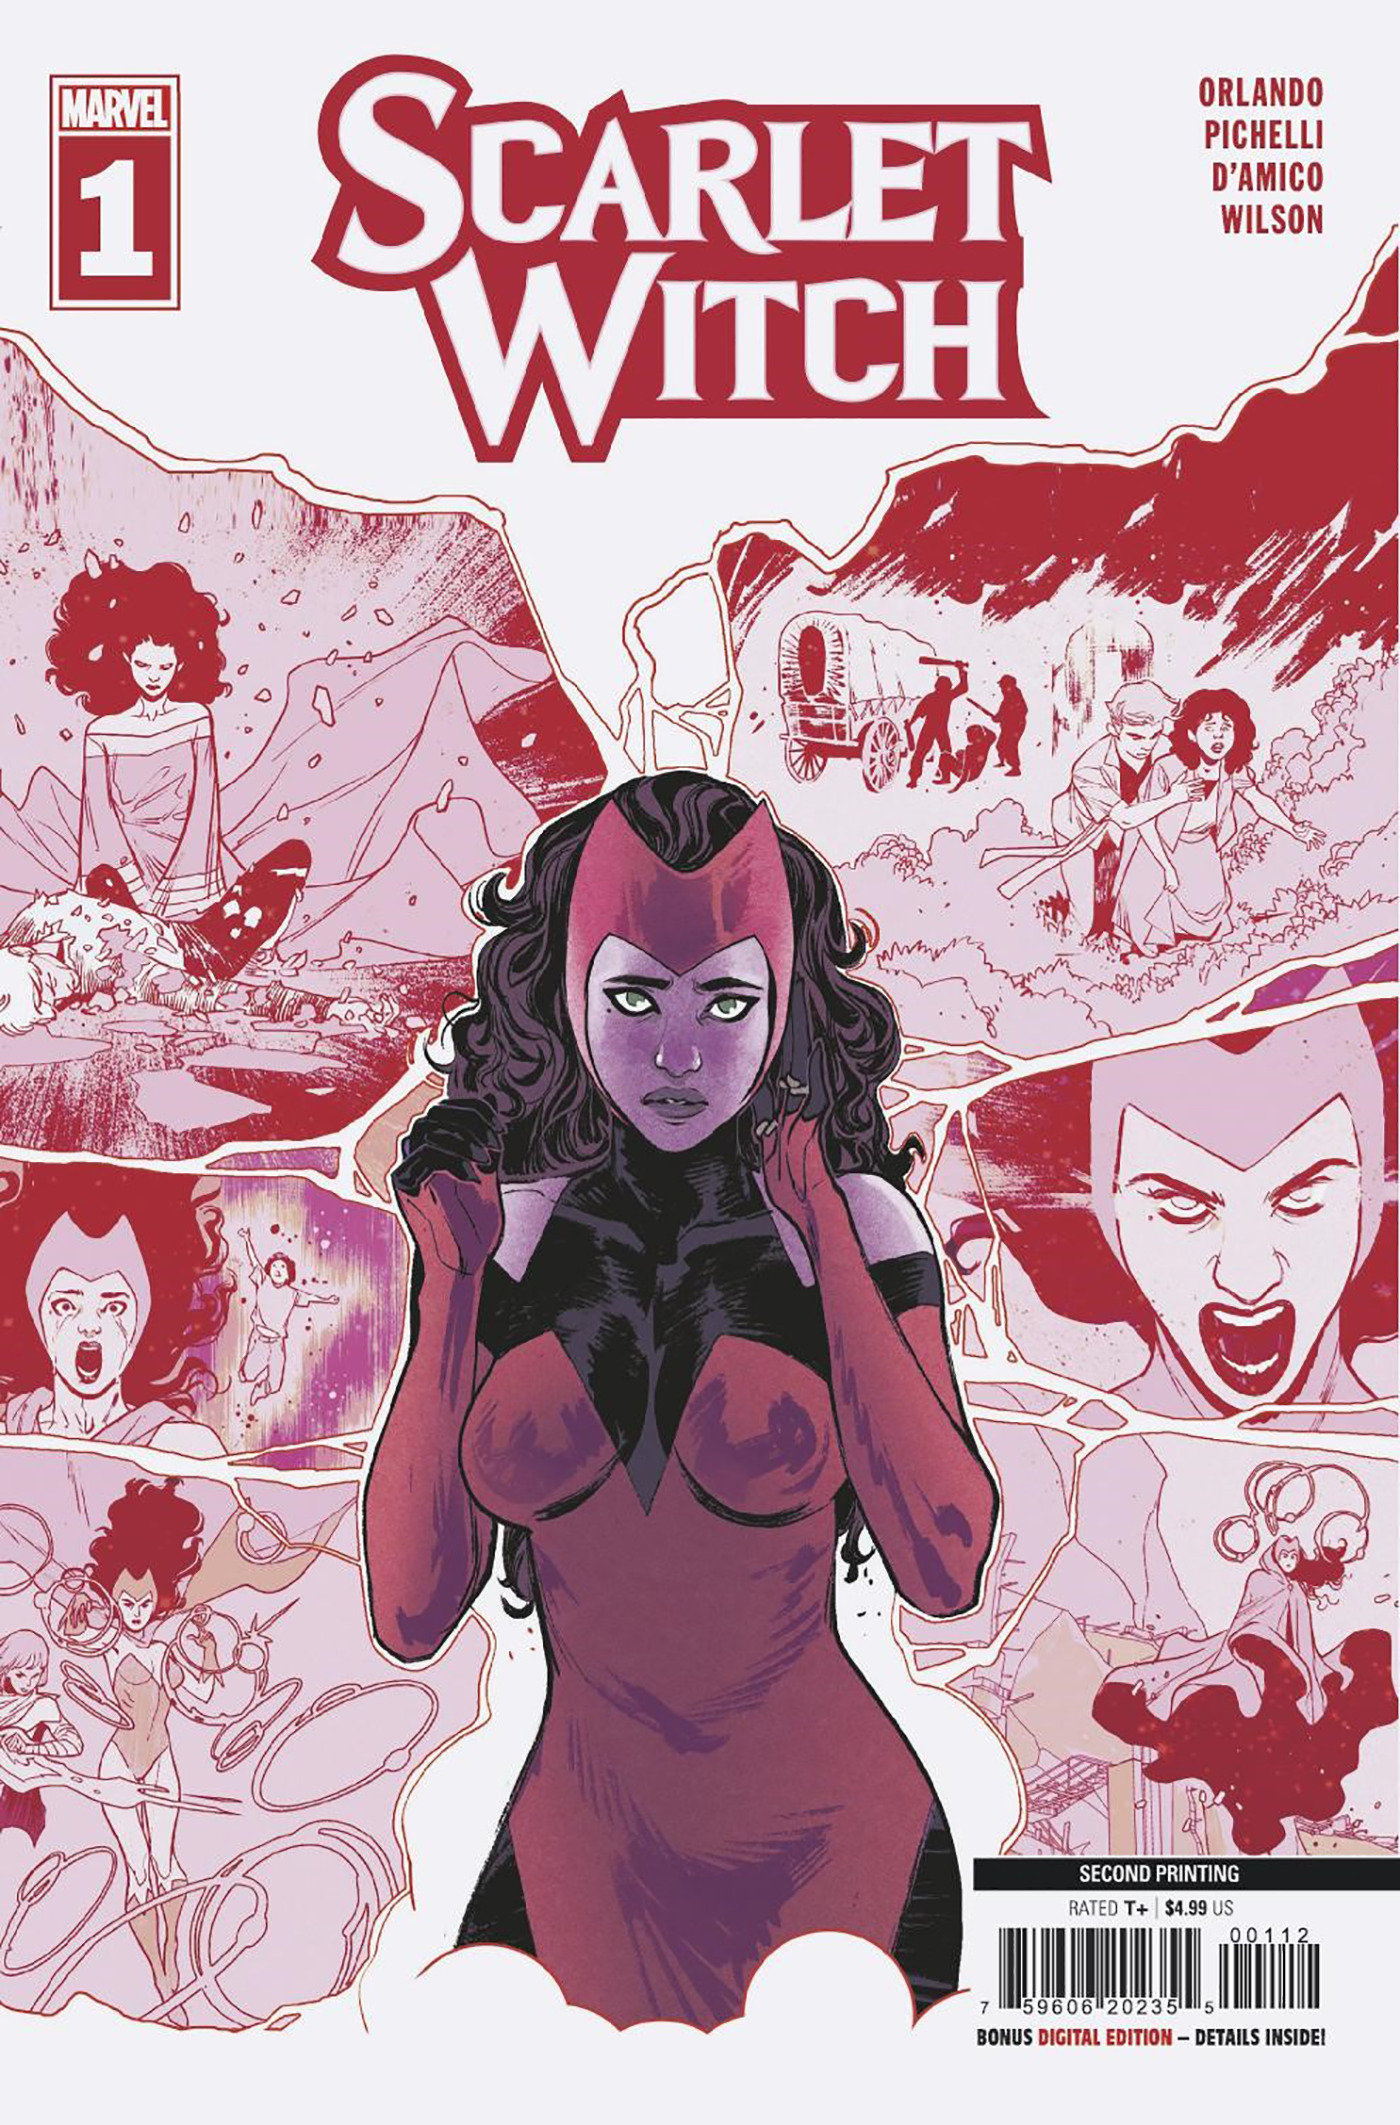 Product Details: Scarlet Witch #1 (2023) tao virgin variant